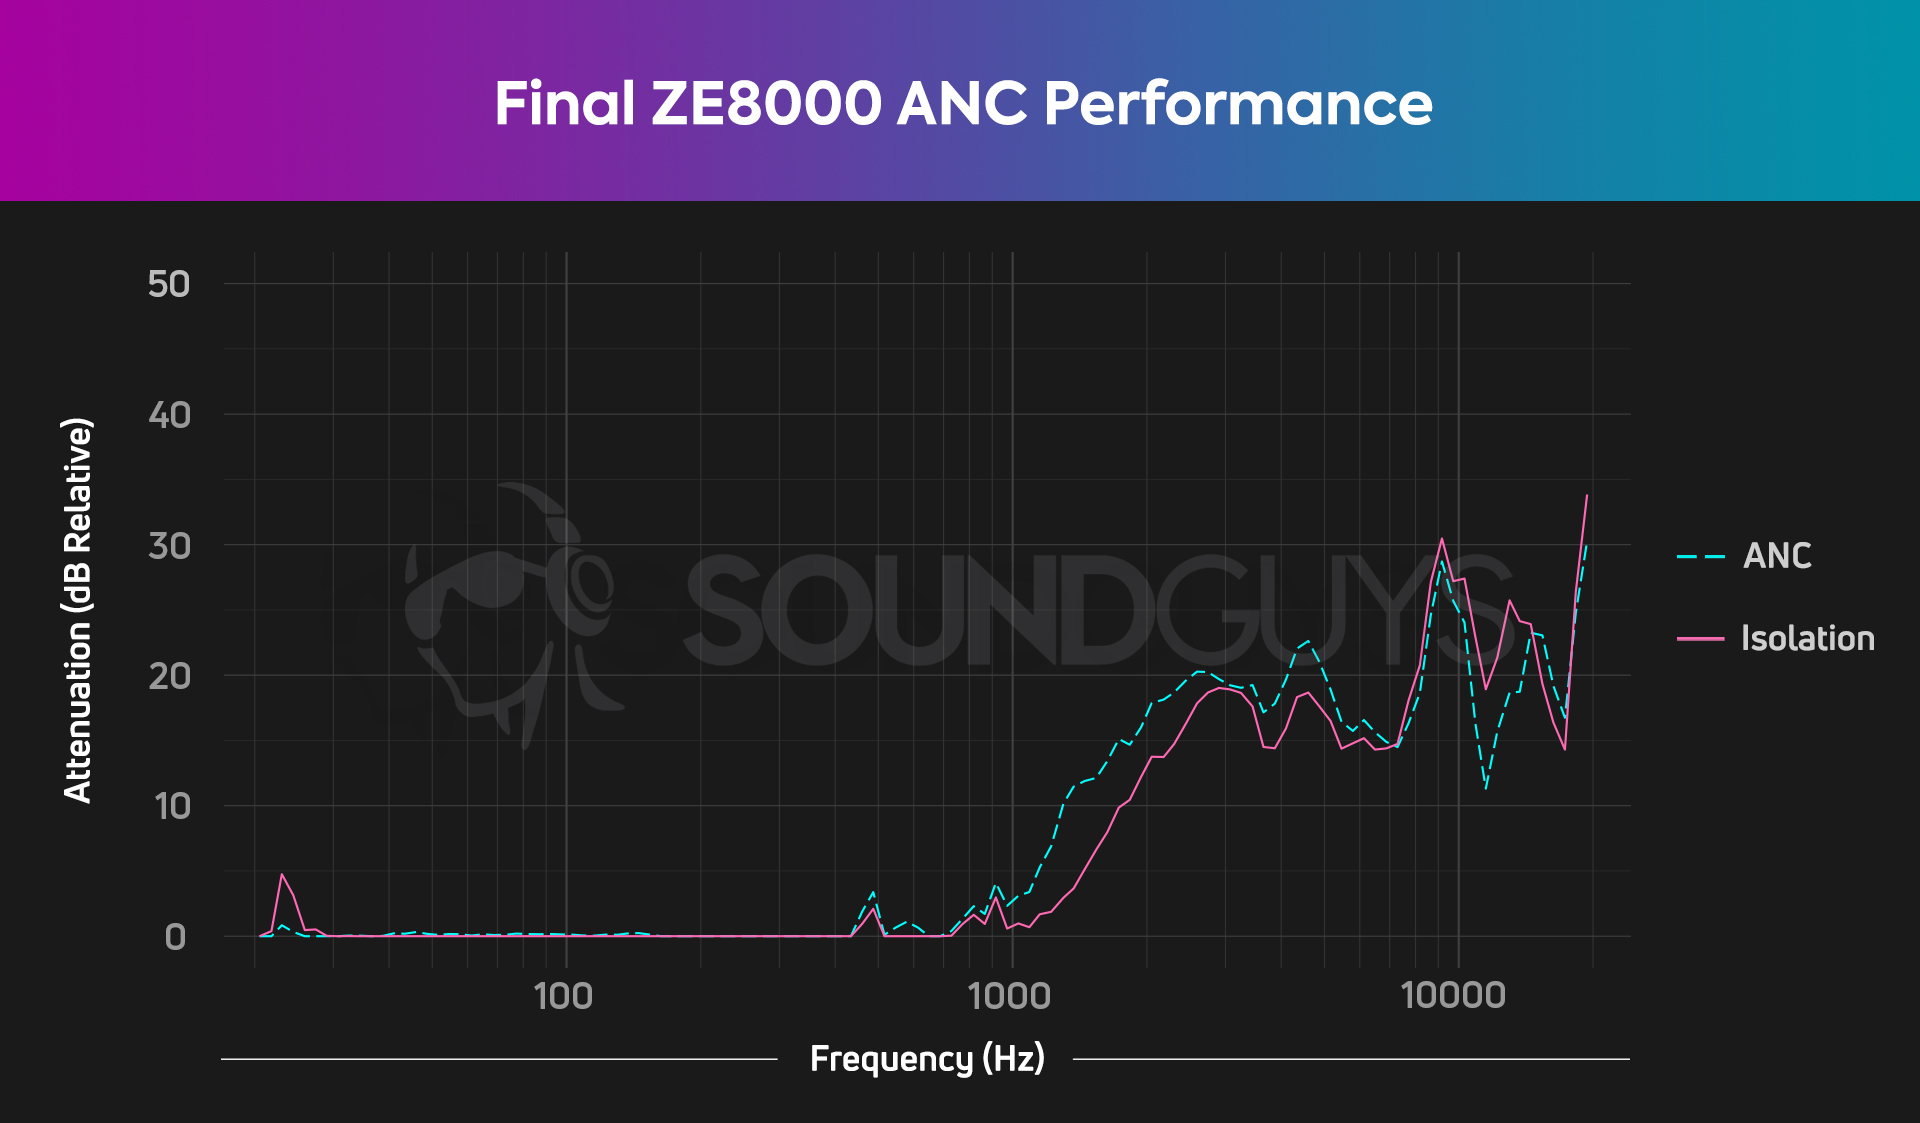 A chart shows the unusual noise canceling and isolation of the Final ZE8000.